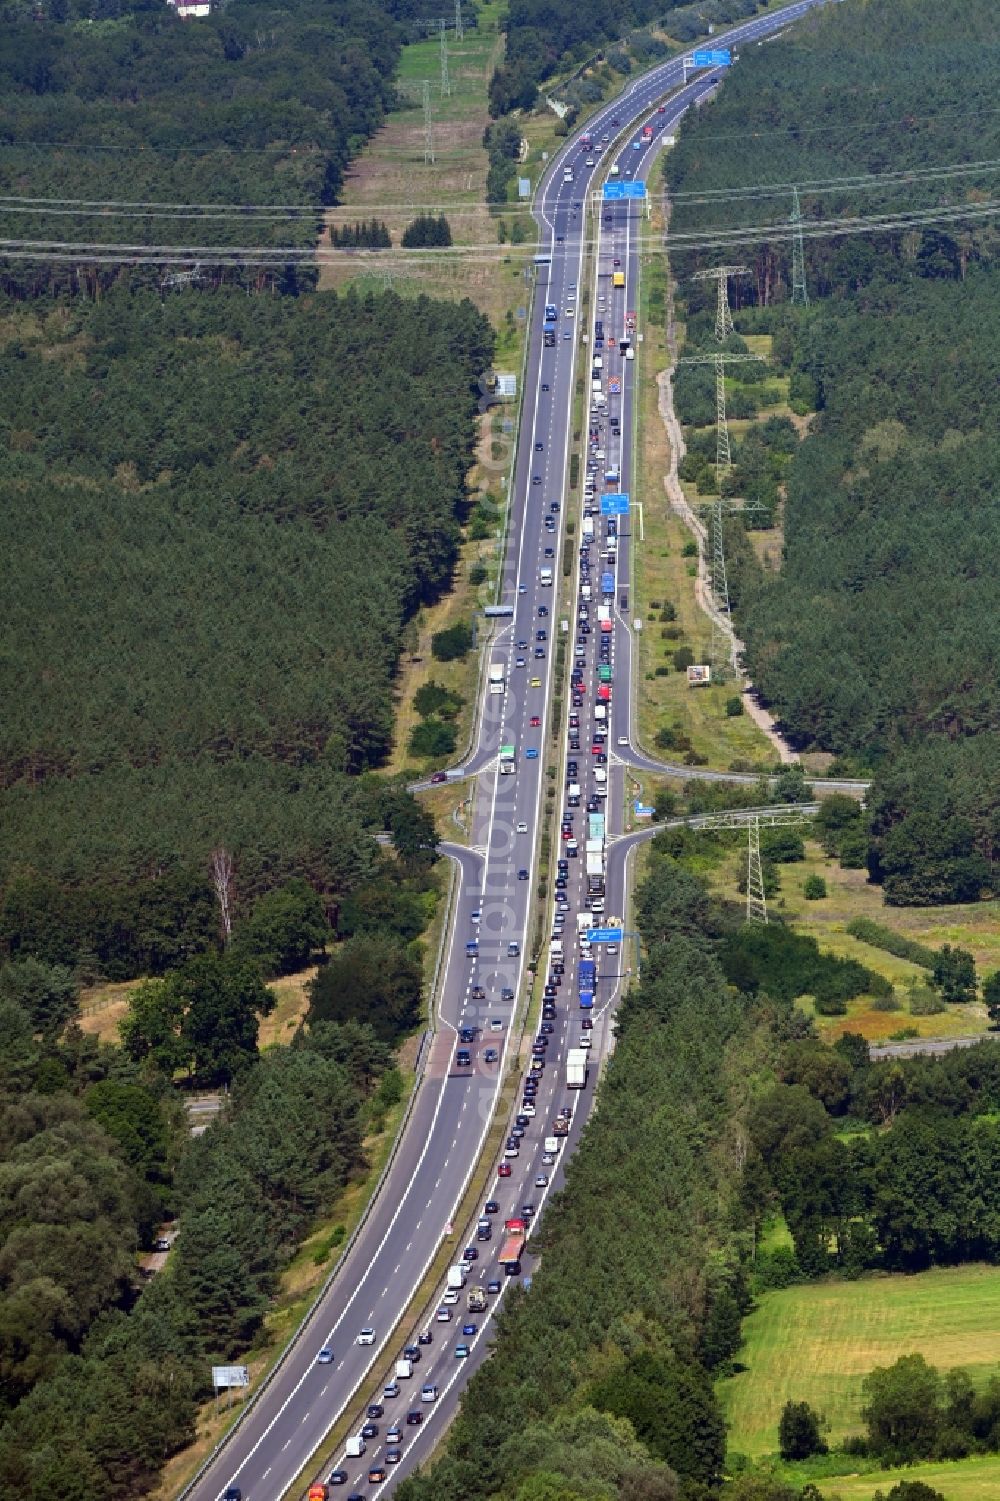 Hohenschöpping from the bird's eye view: Highway congestion along the route of the lanes BAB A111 in Hohenschoepping in the state Brandenburg, Germany